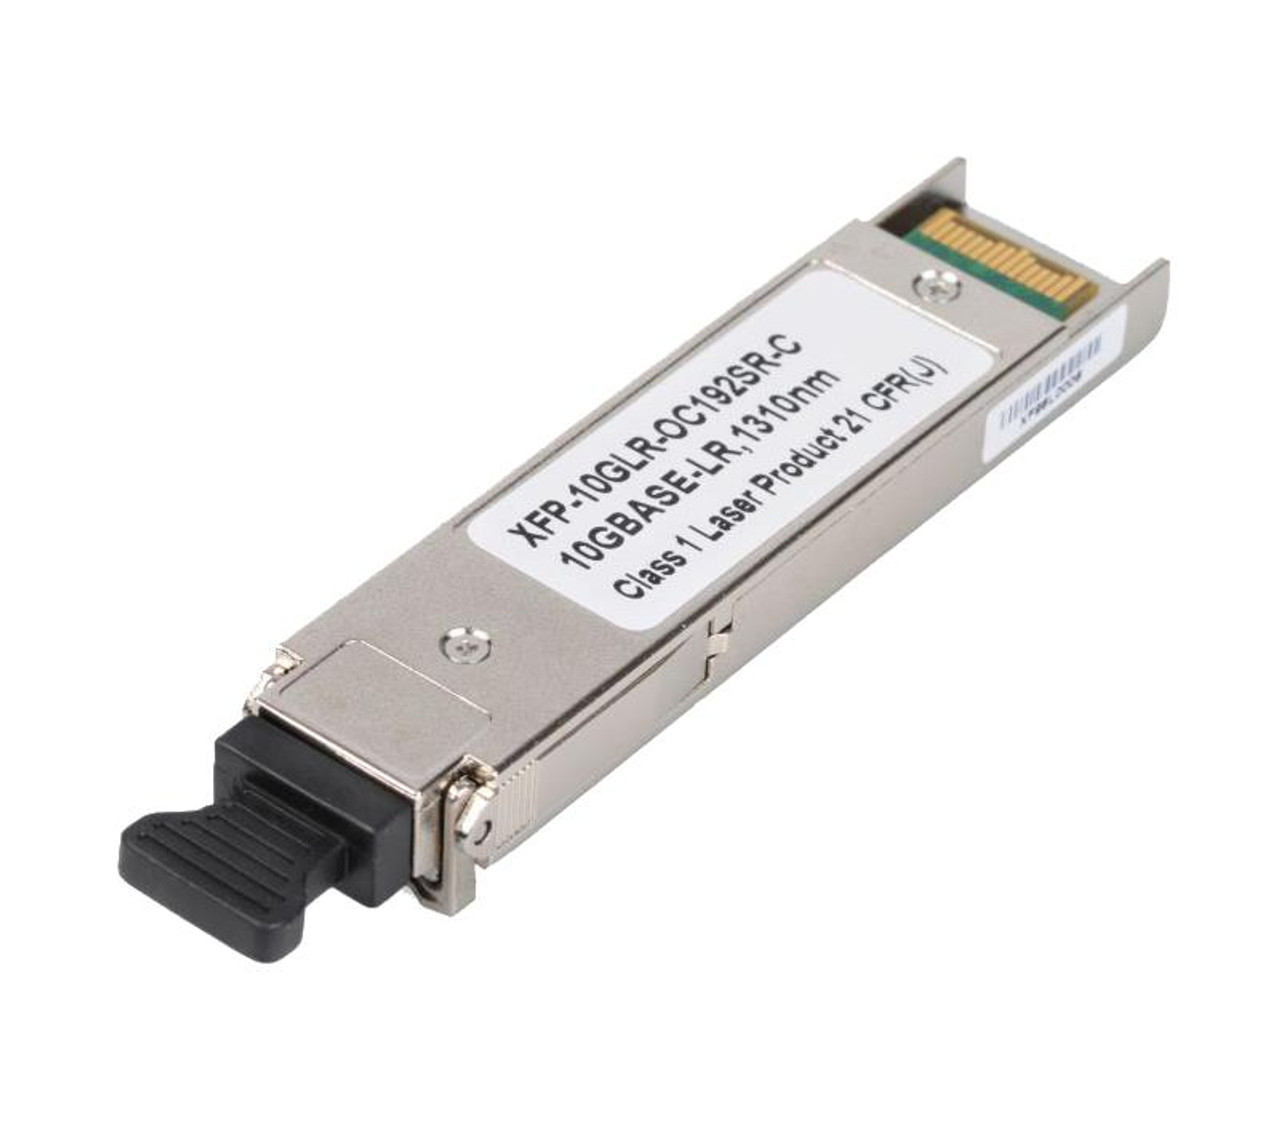 XFP-10GLR-OC192SR-C Brocade Multirate 10Gbps 10GBase-LR Single-mode Fiber 10km 1310nm LC Connector XFP Transceiver Module for Cisco Compatible